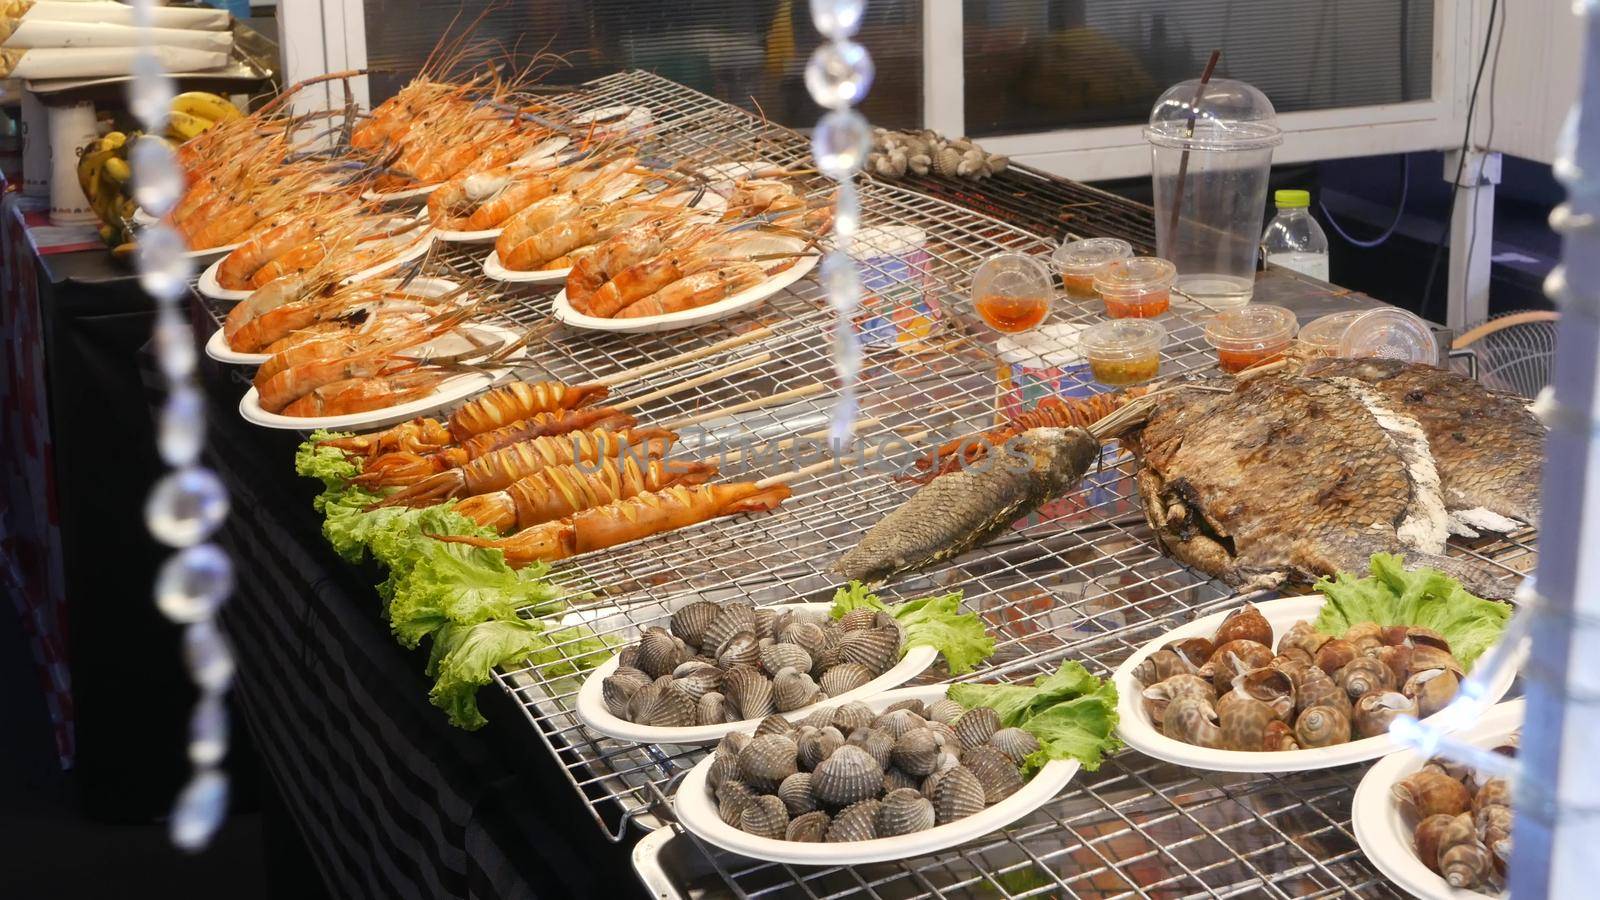 National Asian Exotic ready to eat seafood at night street market food court in Thailand. Delicious Grilled Prawns or Shrimps and other snacks